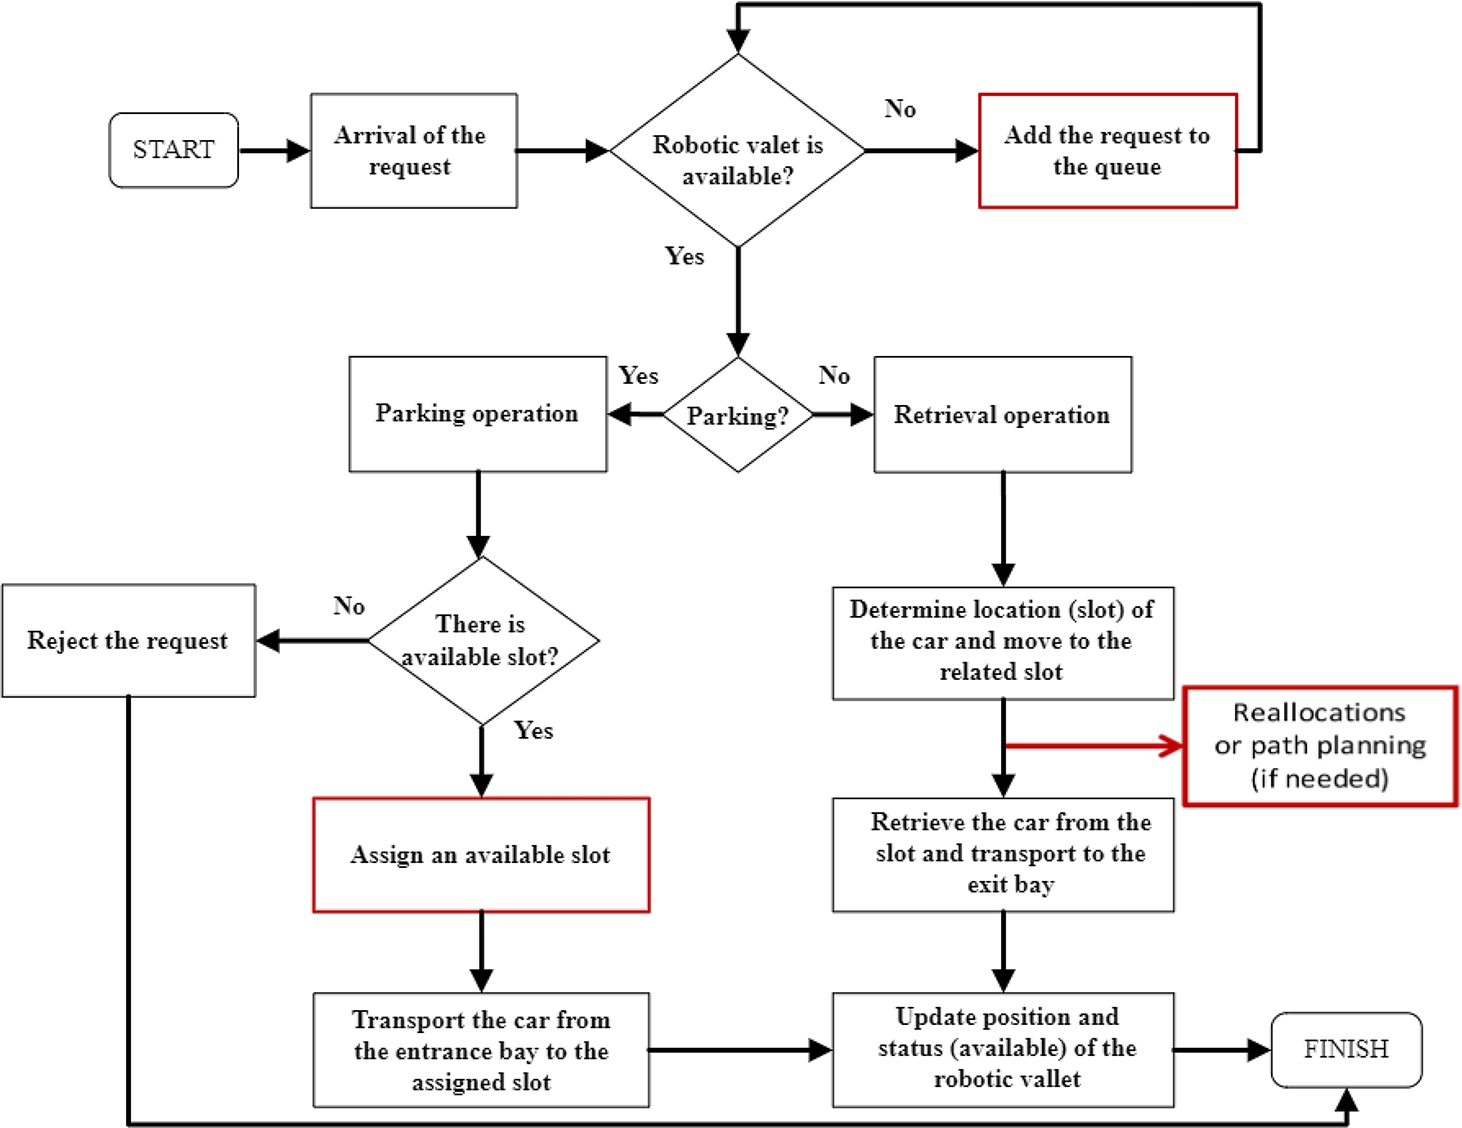 The basic process flow diagram of FAPSs.